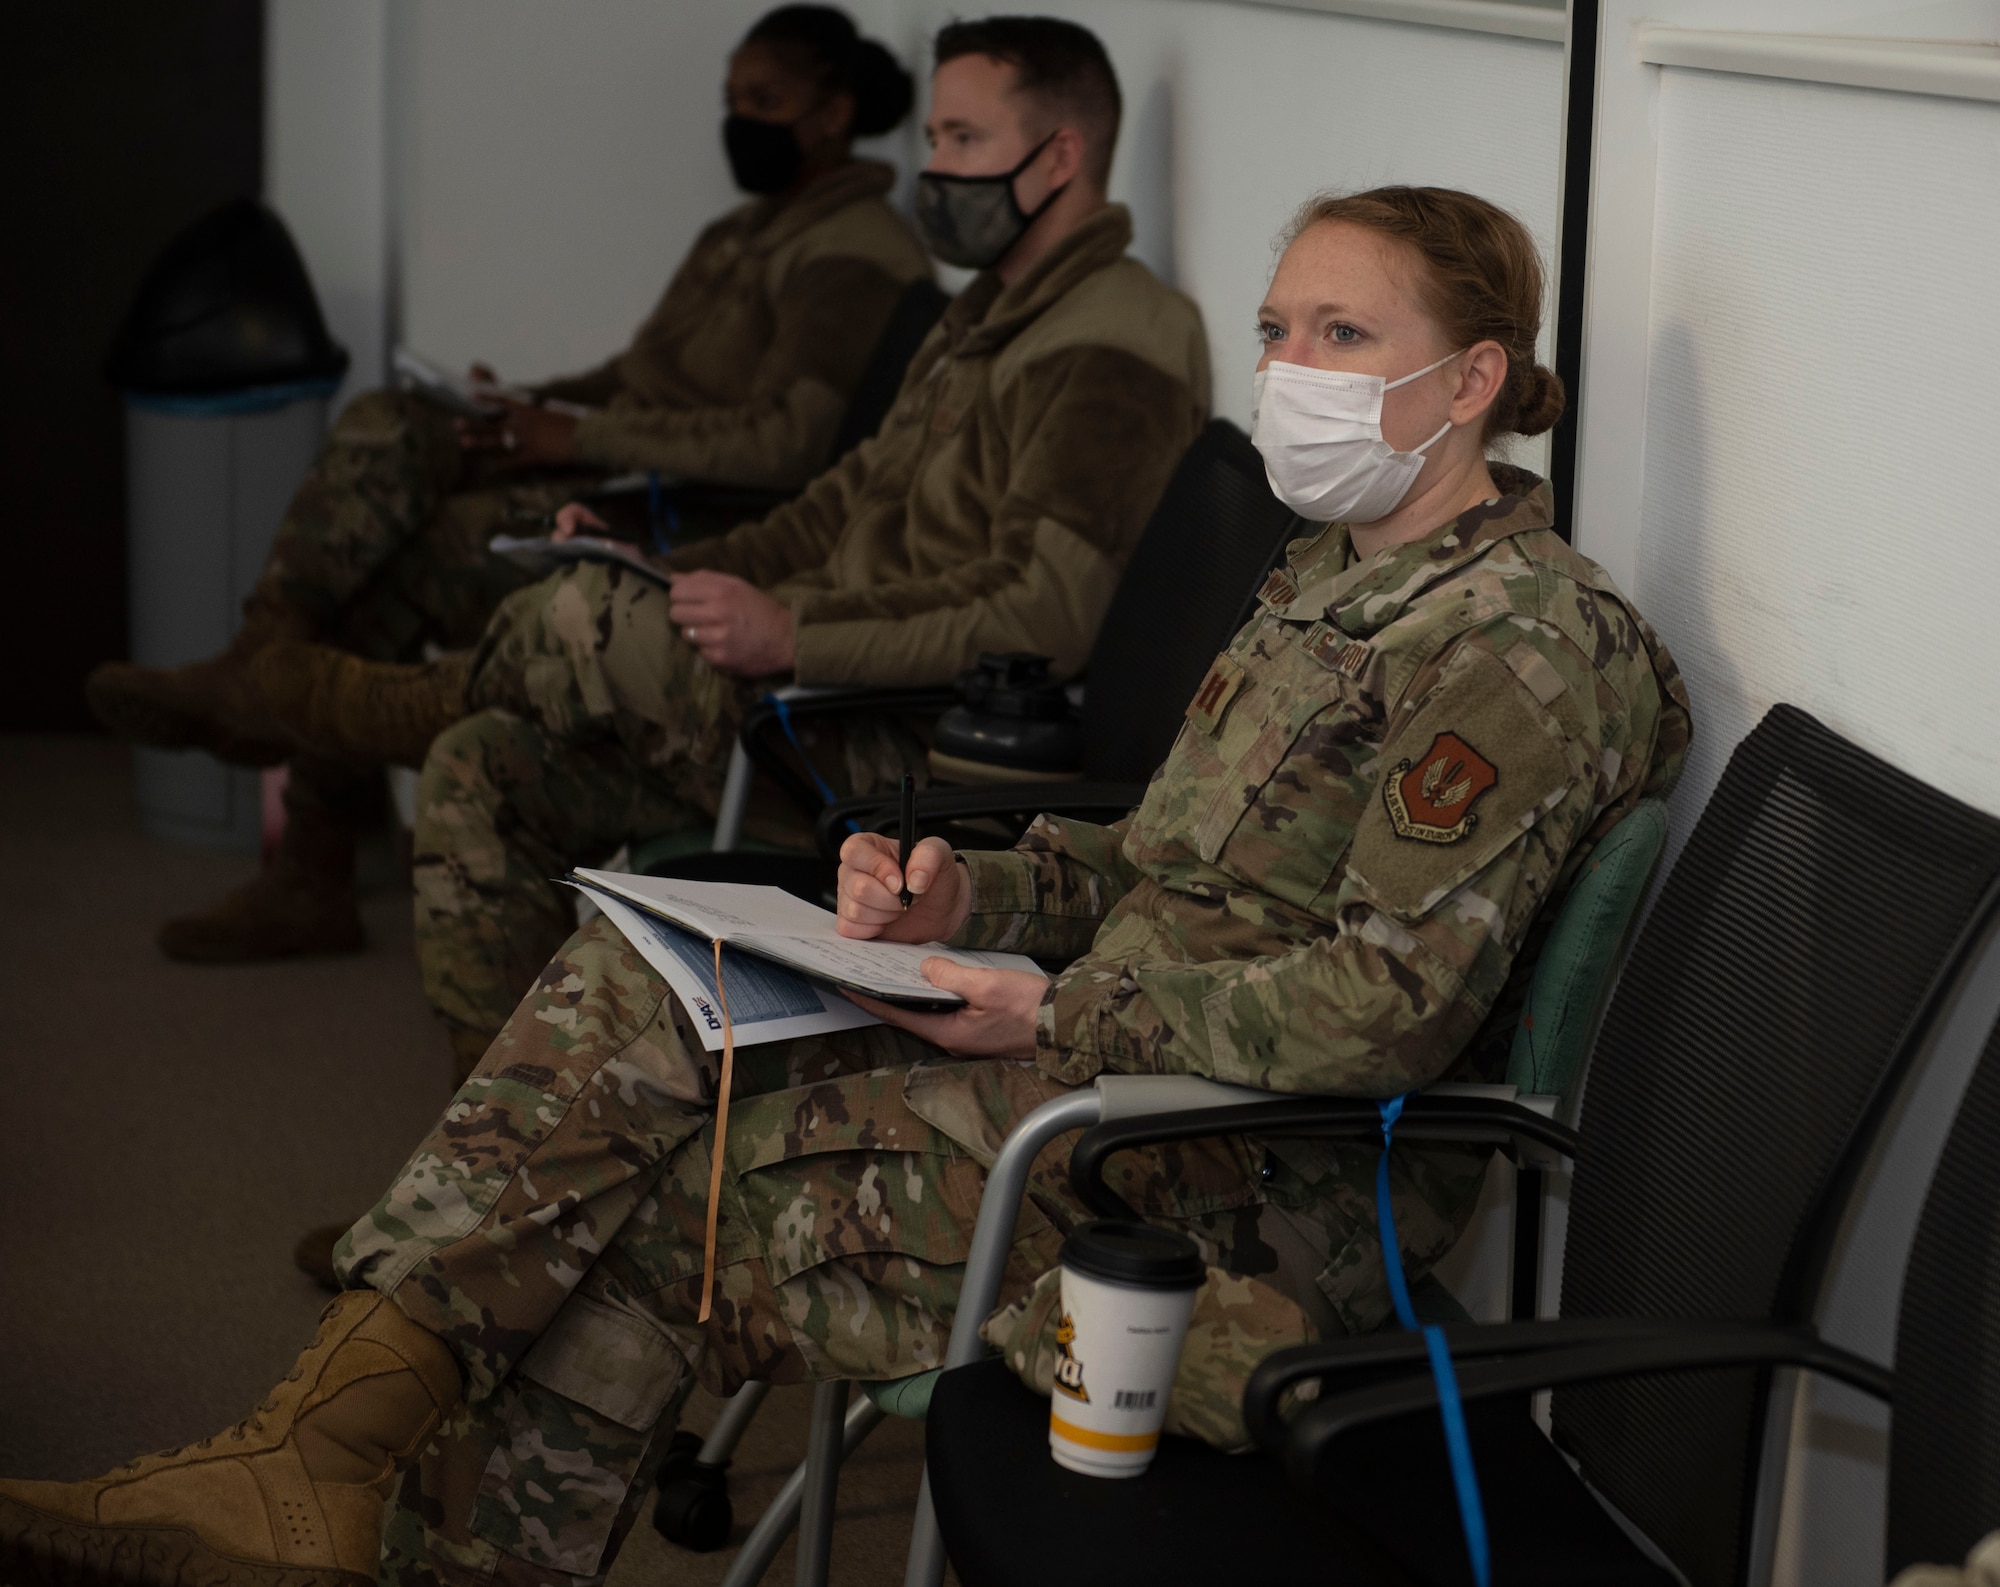 U.S. Air Force Capt. Erin Recanzone, 52nd Fighter Wing chief of public affairs, participates in a table-top exercise regarding the COVID-19 vaccine at Spangdahlem Air Base, Germany, Dec. 1, 2020. During the exercise members were able to maintain their physical distancing and wear masks, allowing them to safely participate and discuss a plan of action for the COVID-19 vaccine and how this will impact the 52nd FW along with surrounding geographically separated units. (U.S. Air Force photo by Senior Airman Melody W. Howley)